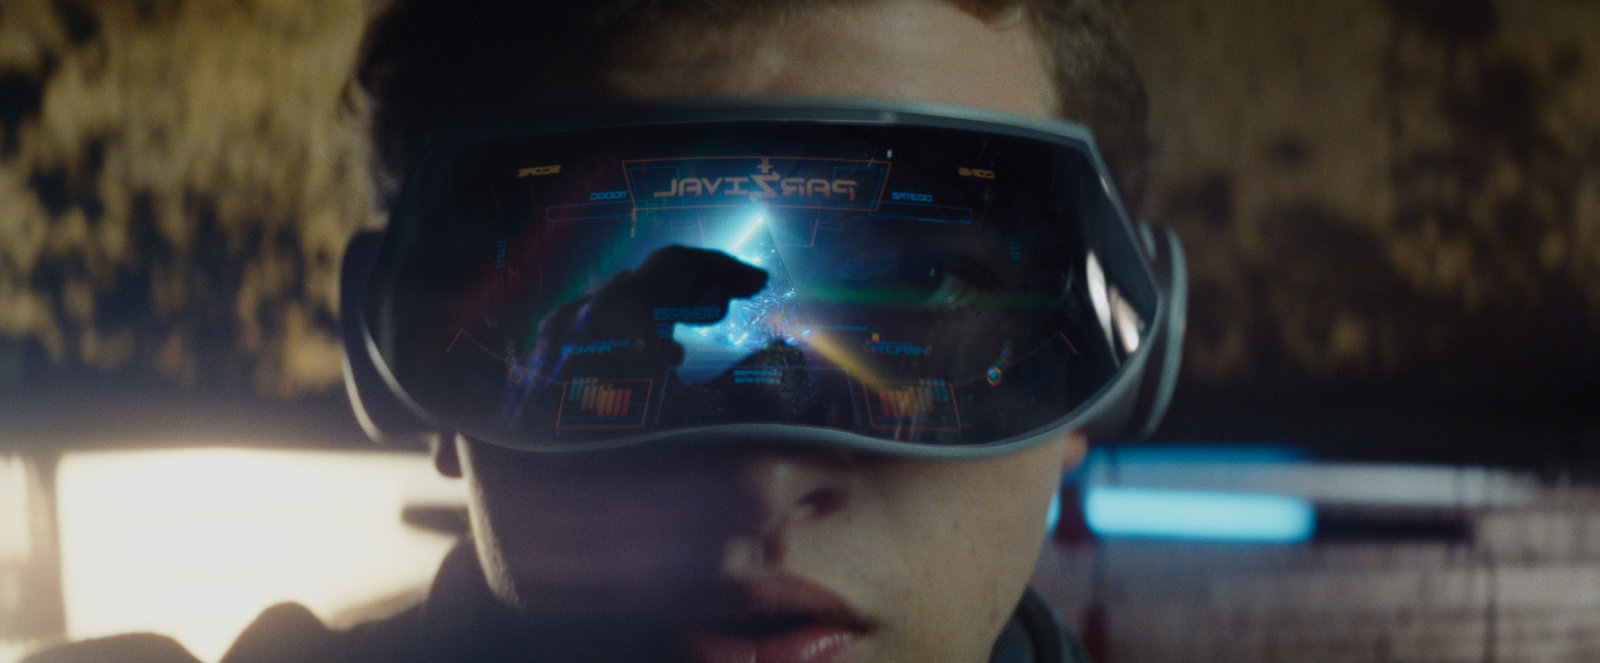 Ready Player One (3D blu-ray)